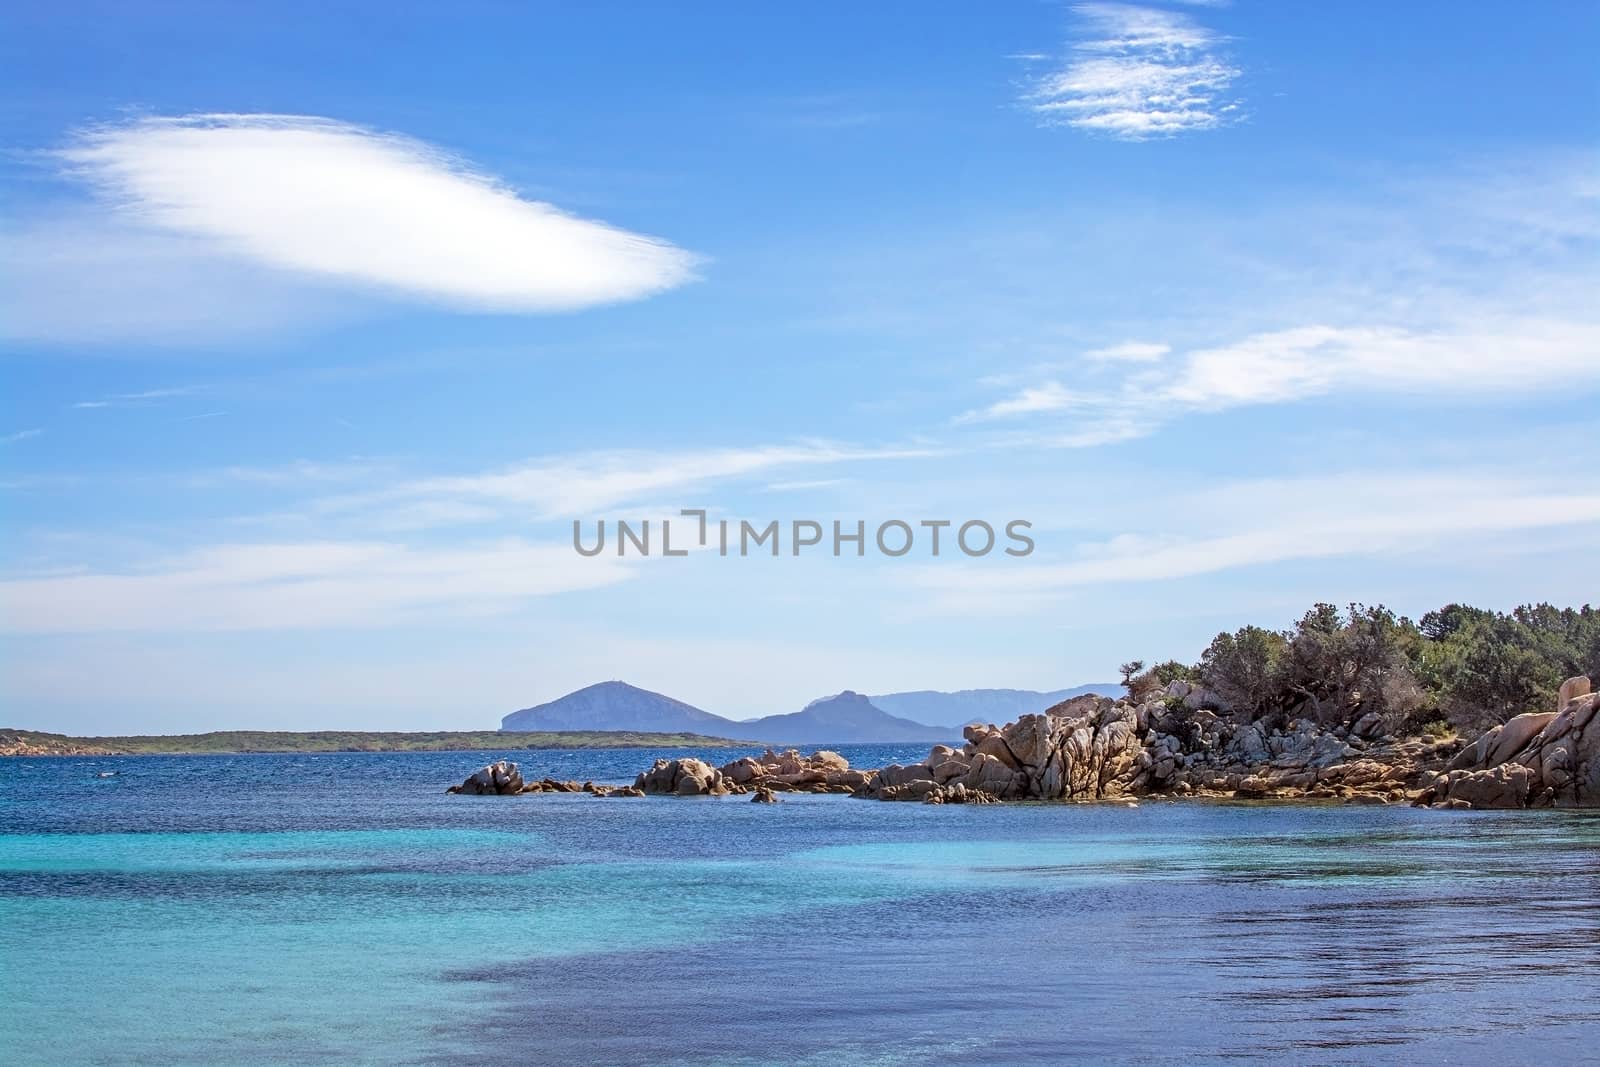 Seascape from a winter beach and blue and green sea in Costa Smeralda, Sardinia, Italy in March.